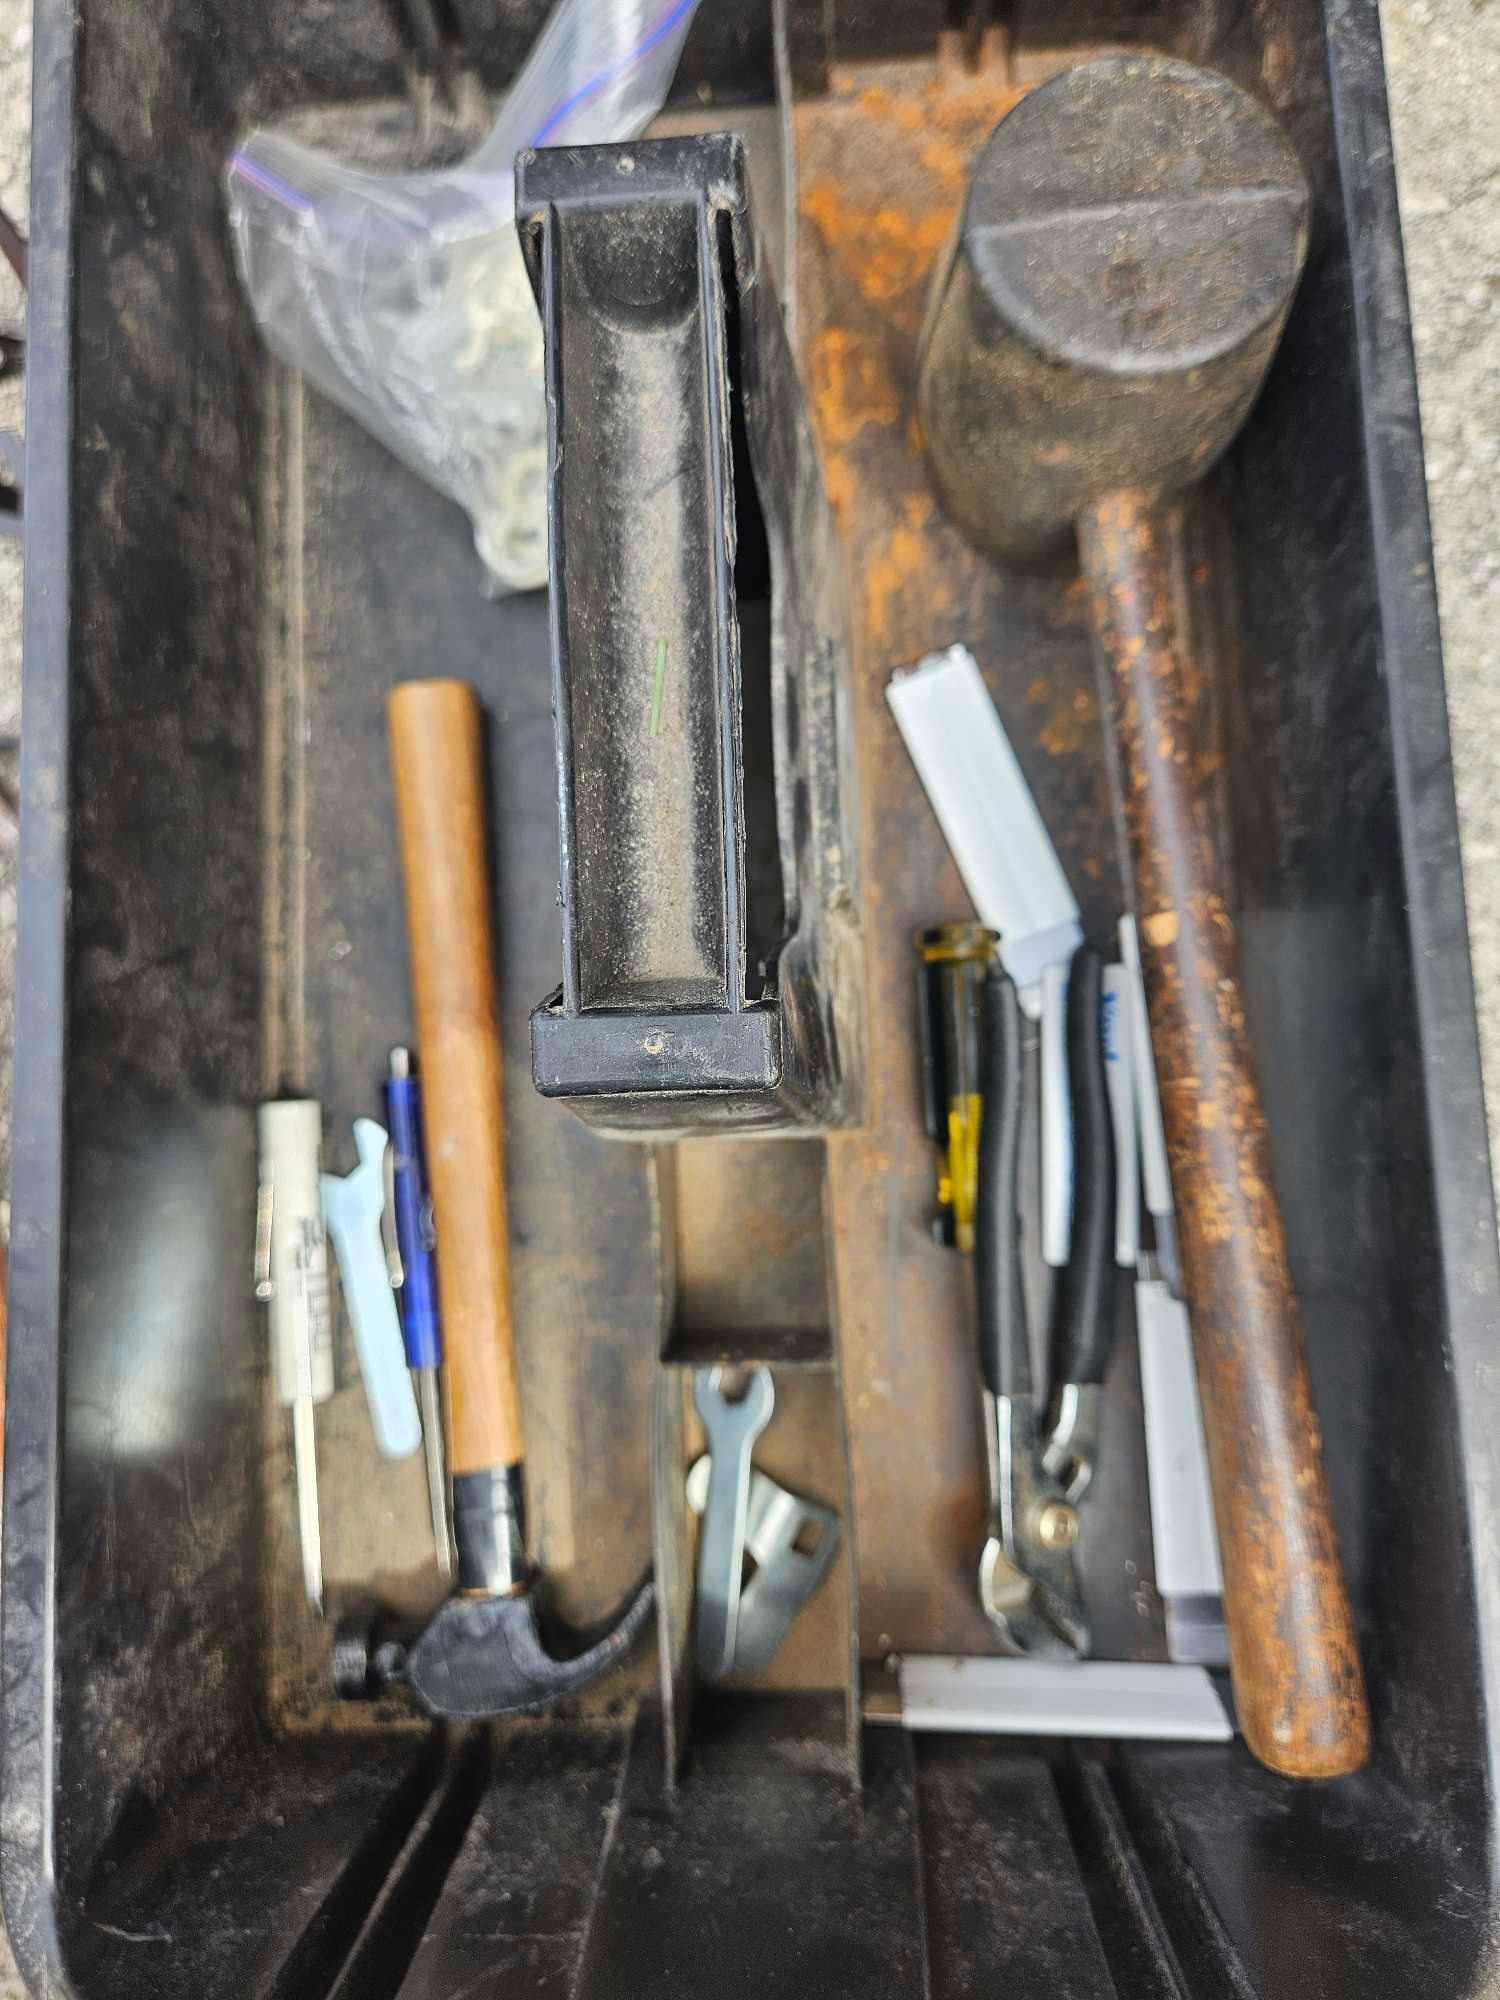 Craftsman Hammer, and Tote of tools